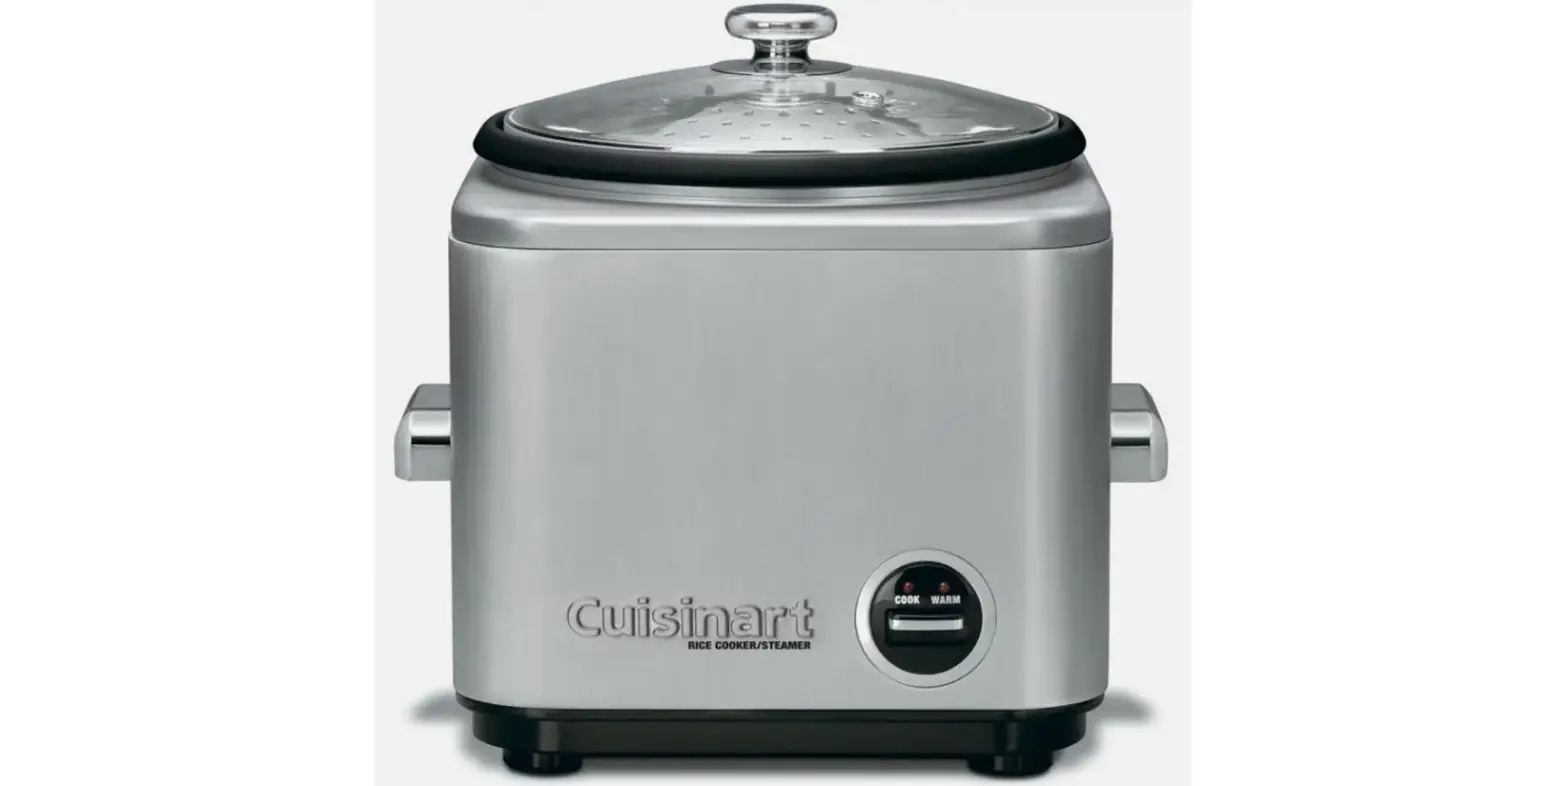 Cuisinart CRC-800 Rice Cooker Instruction Manual